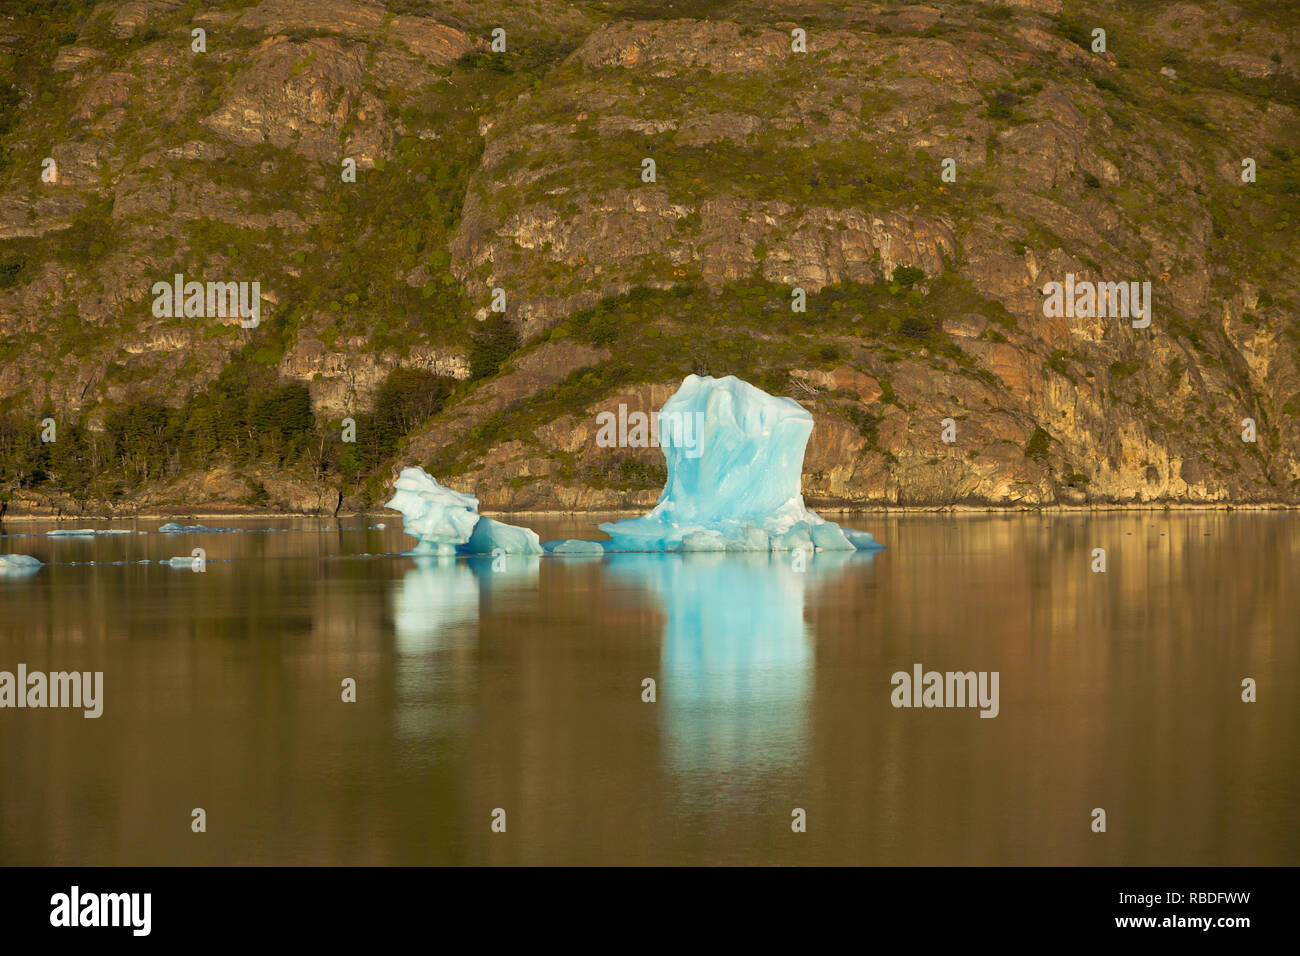 An iceberg floating in a lake in Los Glaciares National Park in Chile. Stock Photo